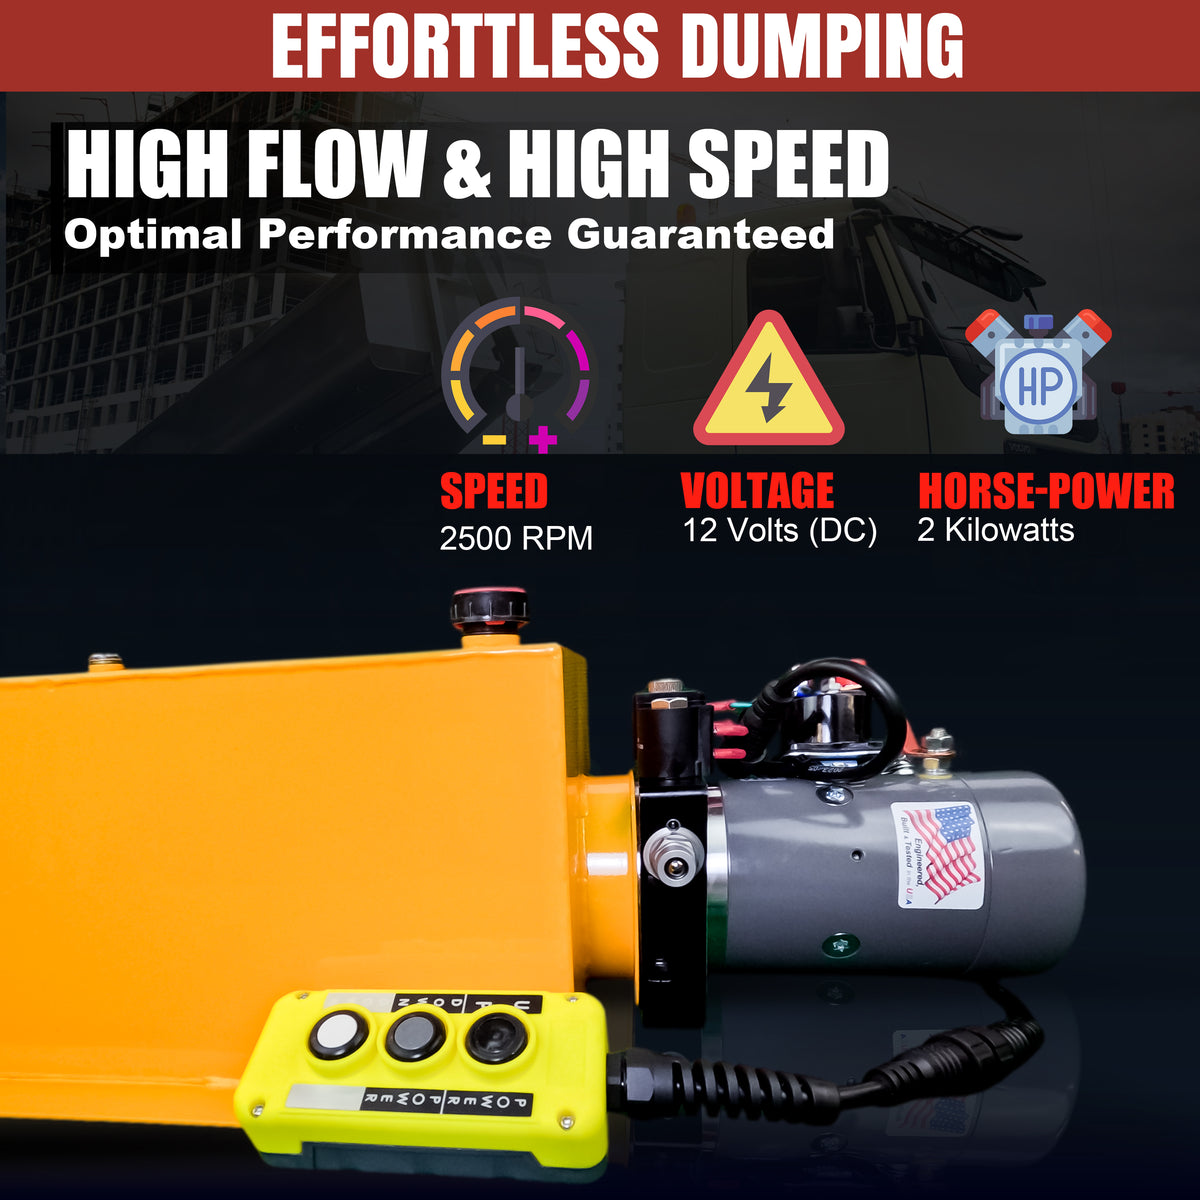 KTI 12V Double-Acting Hydraulic Pump with steel reservoir, featuring buttons, a black cord, and a colorful gauge. Ideal for hydraulic dump bed systems.